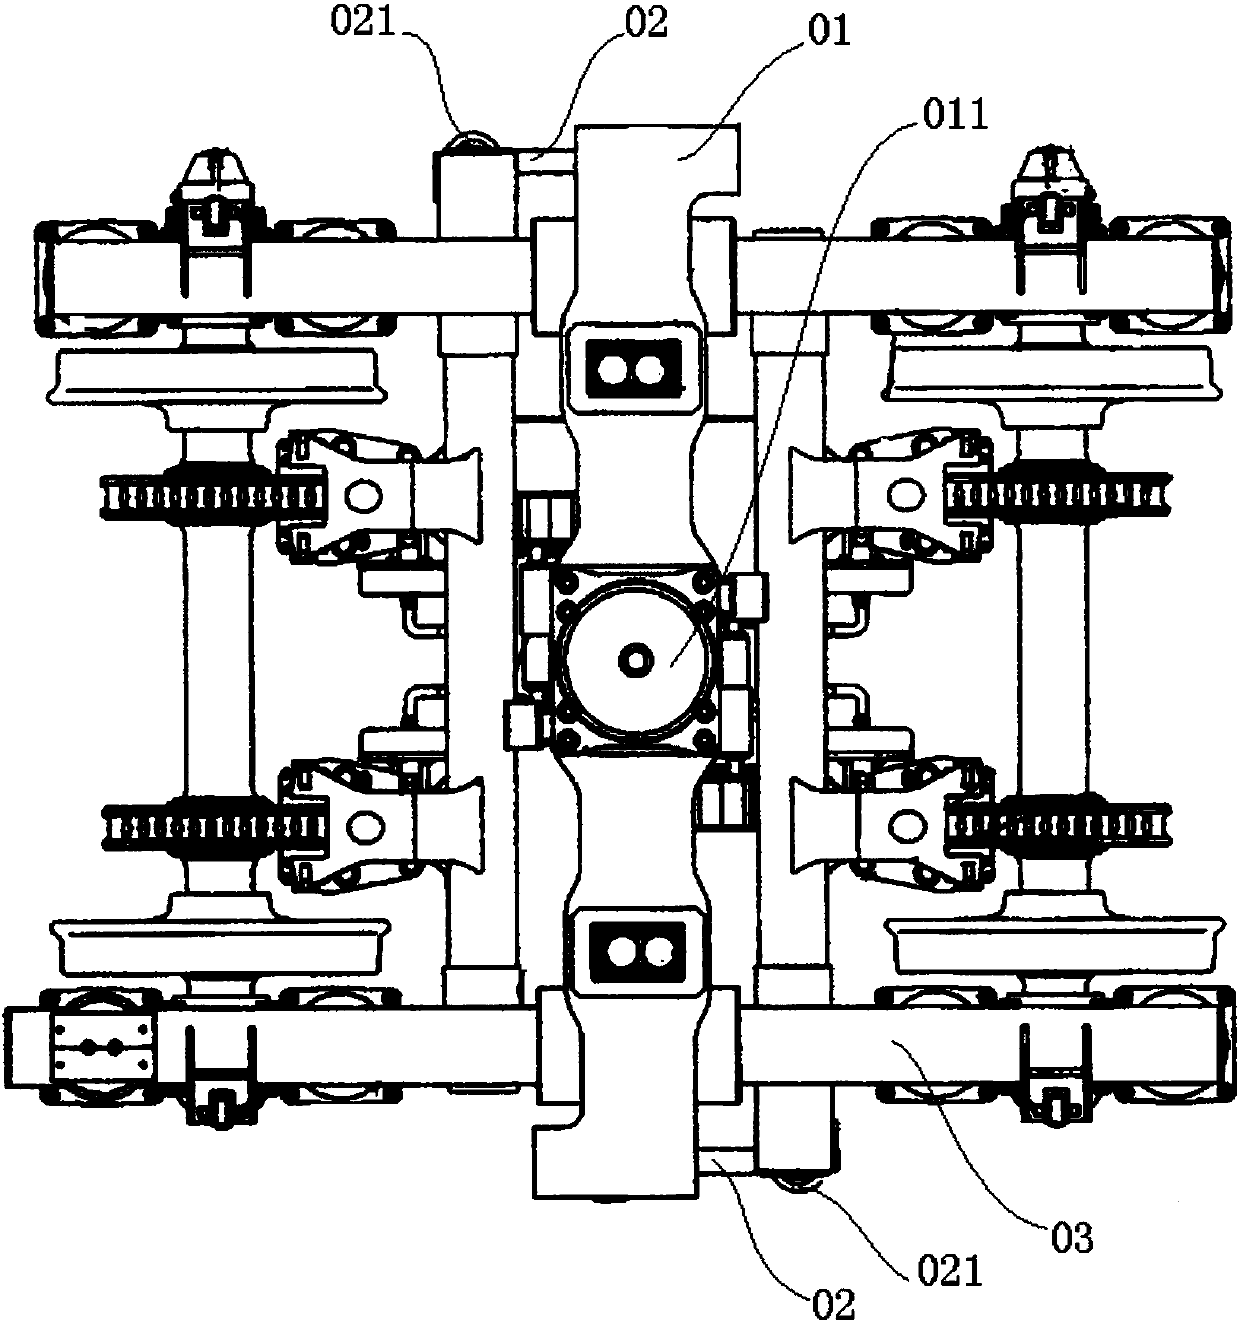 Bogie and traction apparatus thereof